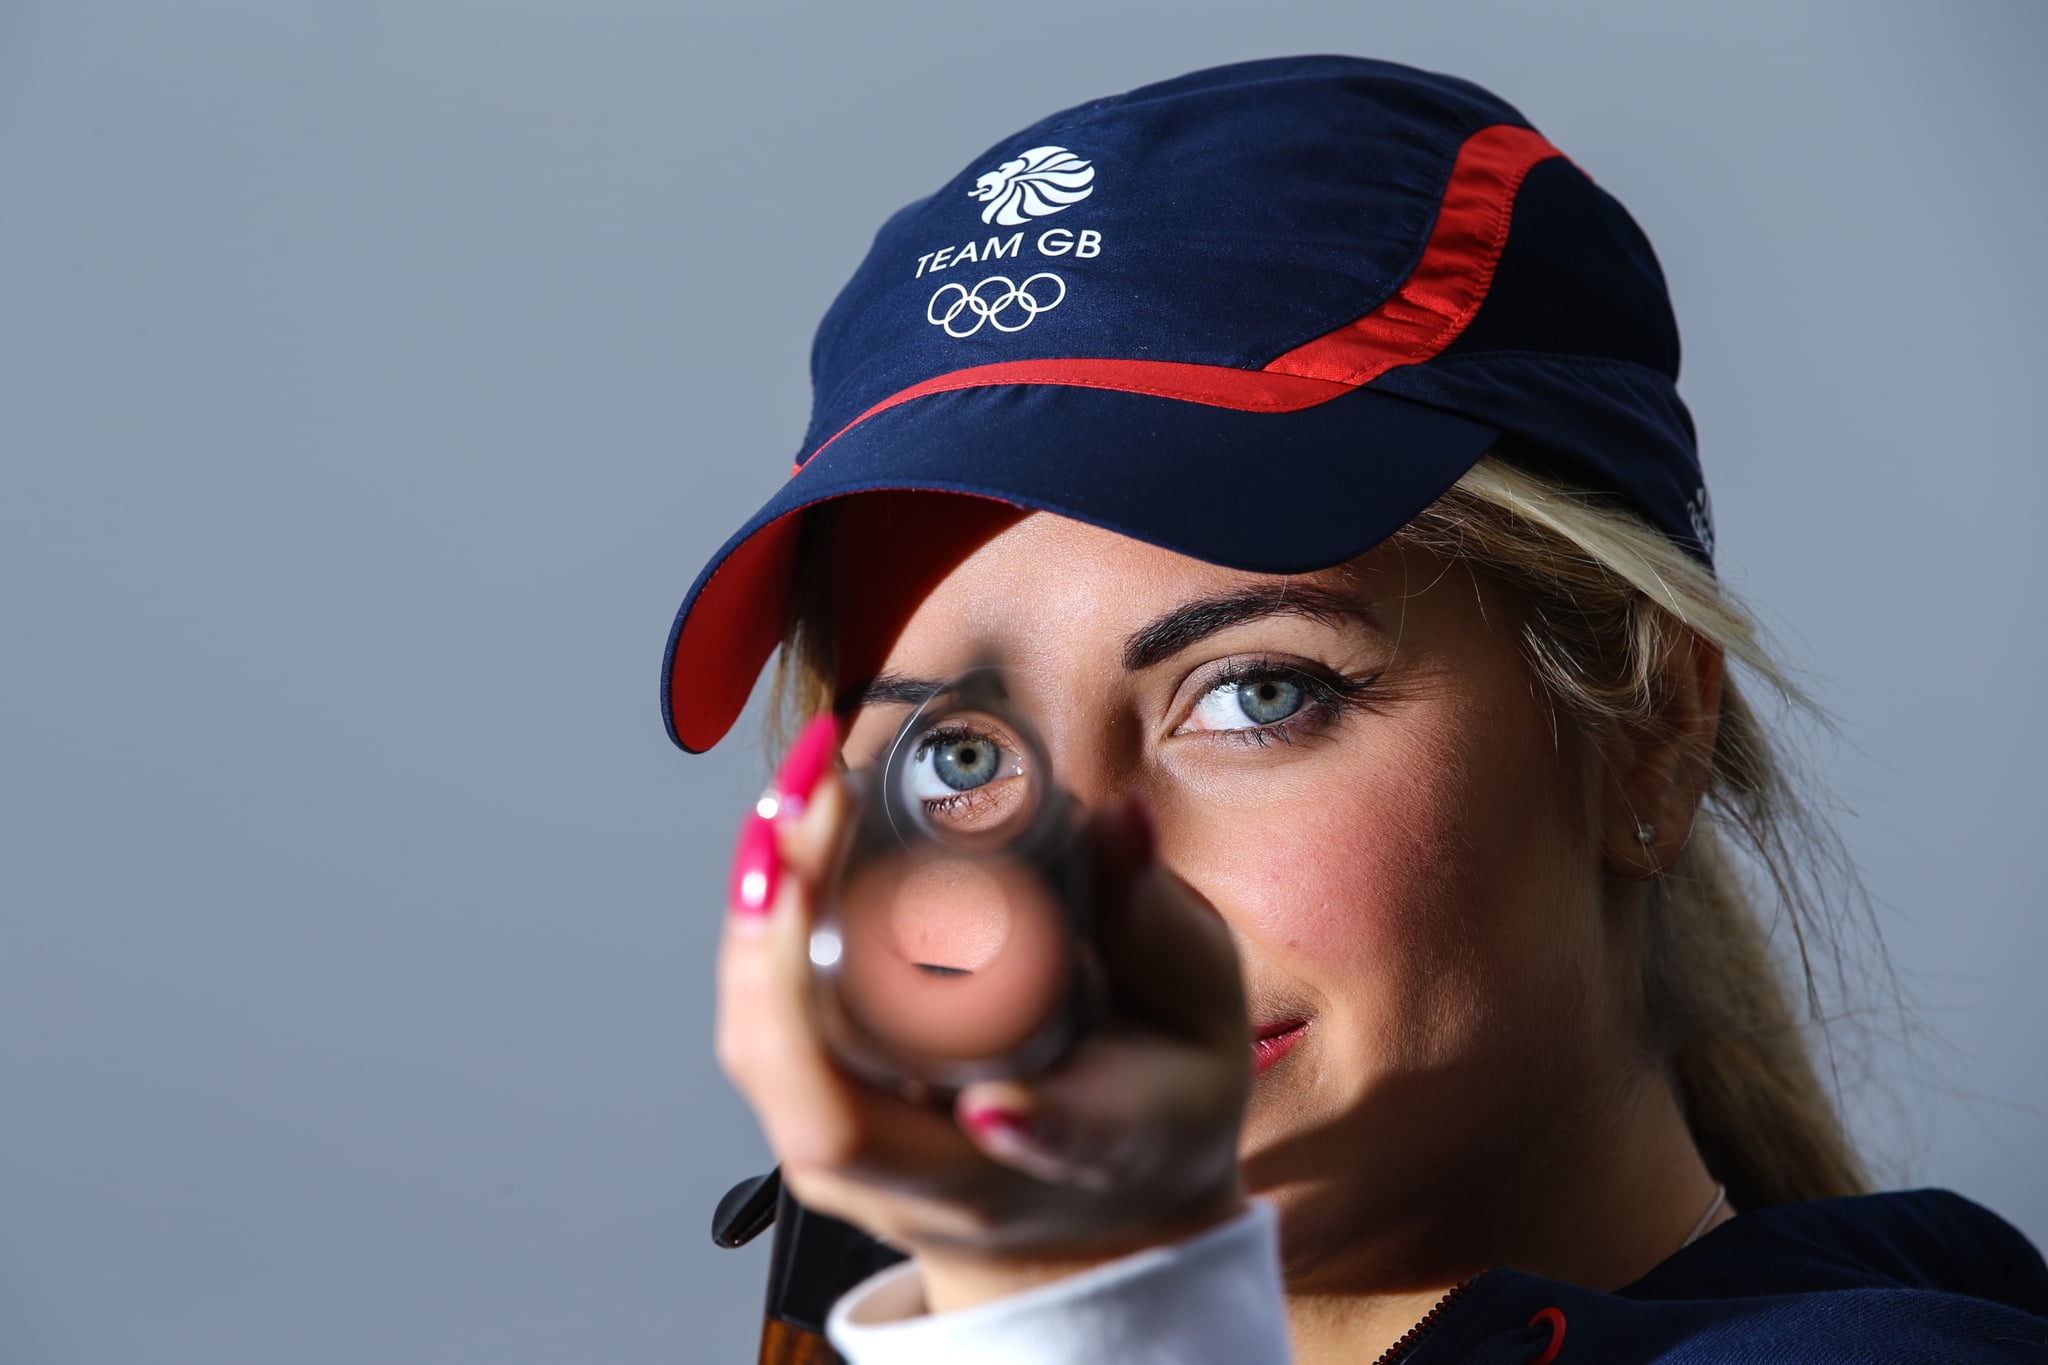 HIGH WYCOMBE, ENGLAND - NOVEMBER 02:  (EDITORS NOTE: IMAGE EMBARGOED BEFORE 10th NOVEMBER 2015) 18yr old Amber Hill poses for a portrait as she is selected for the Team GB Shooting Team for Rio 2016 Olympic Games at the E.J.Churchill Shooting Ground on November 02, 2015 in High Wycombe, England.  (Photo by Richard Heathcote/Getty Images)